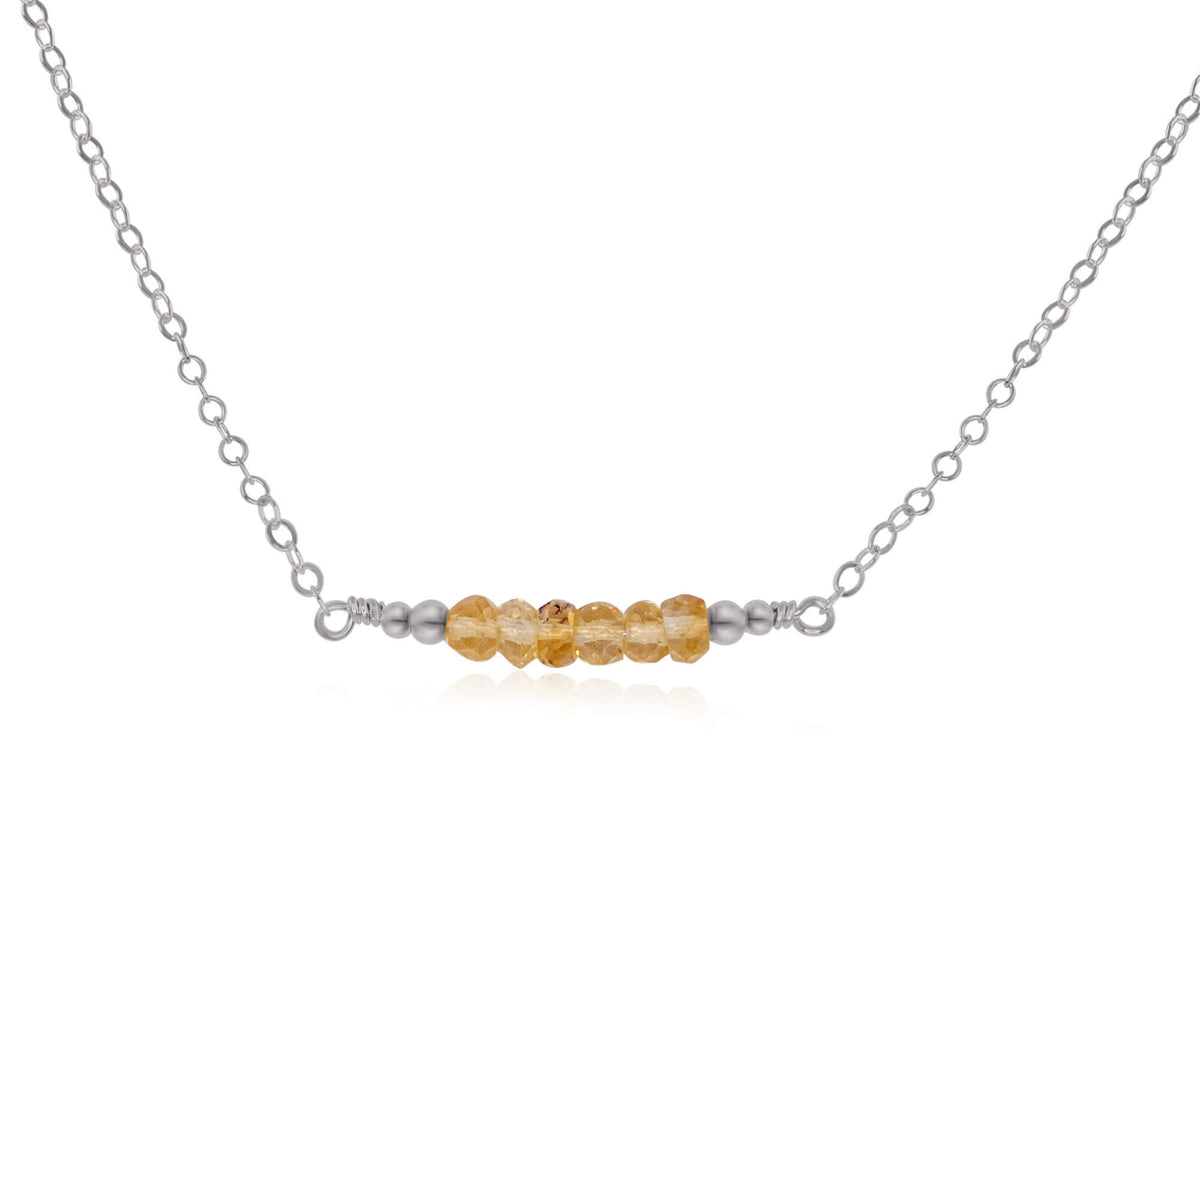 Faceted Bead Bar Necklace - Citrine - Stainless Steel - Luna Tide Handmade Jewellery